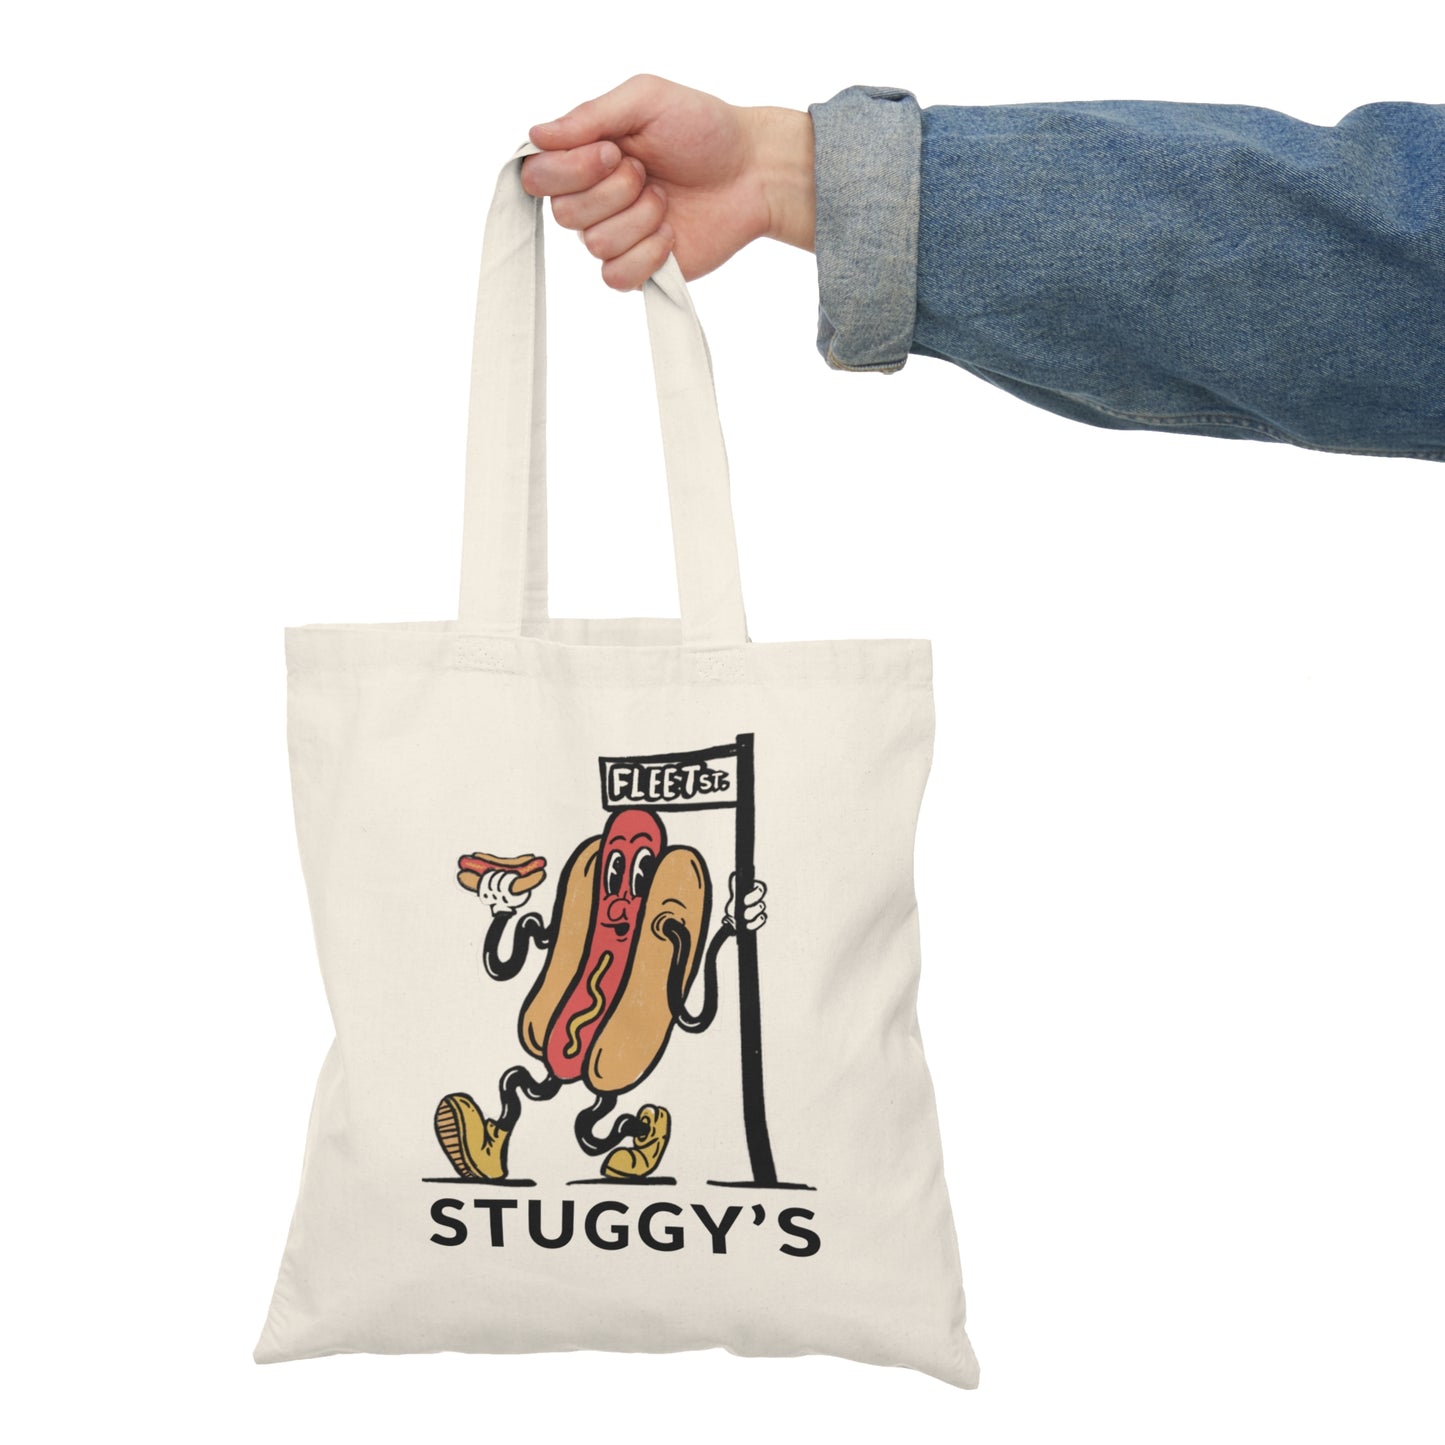 GOT THAT DOG IN ME TOTE BAG